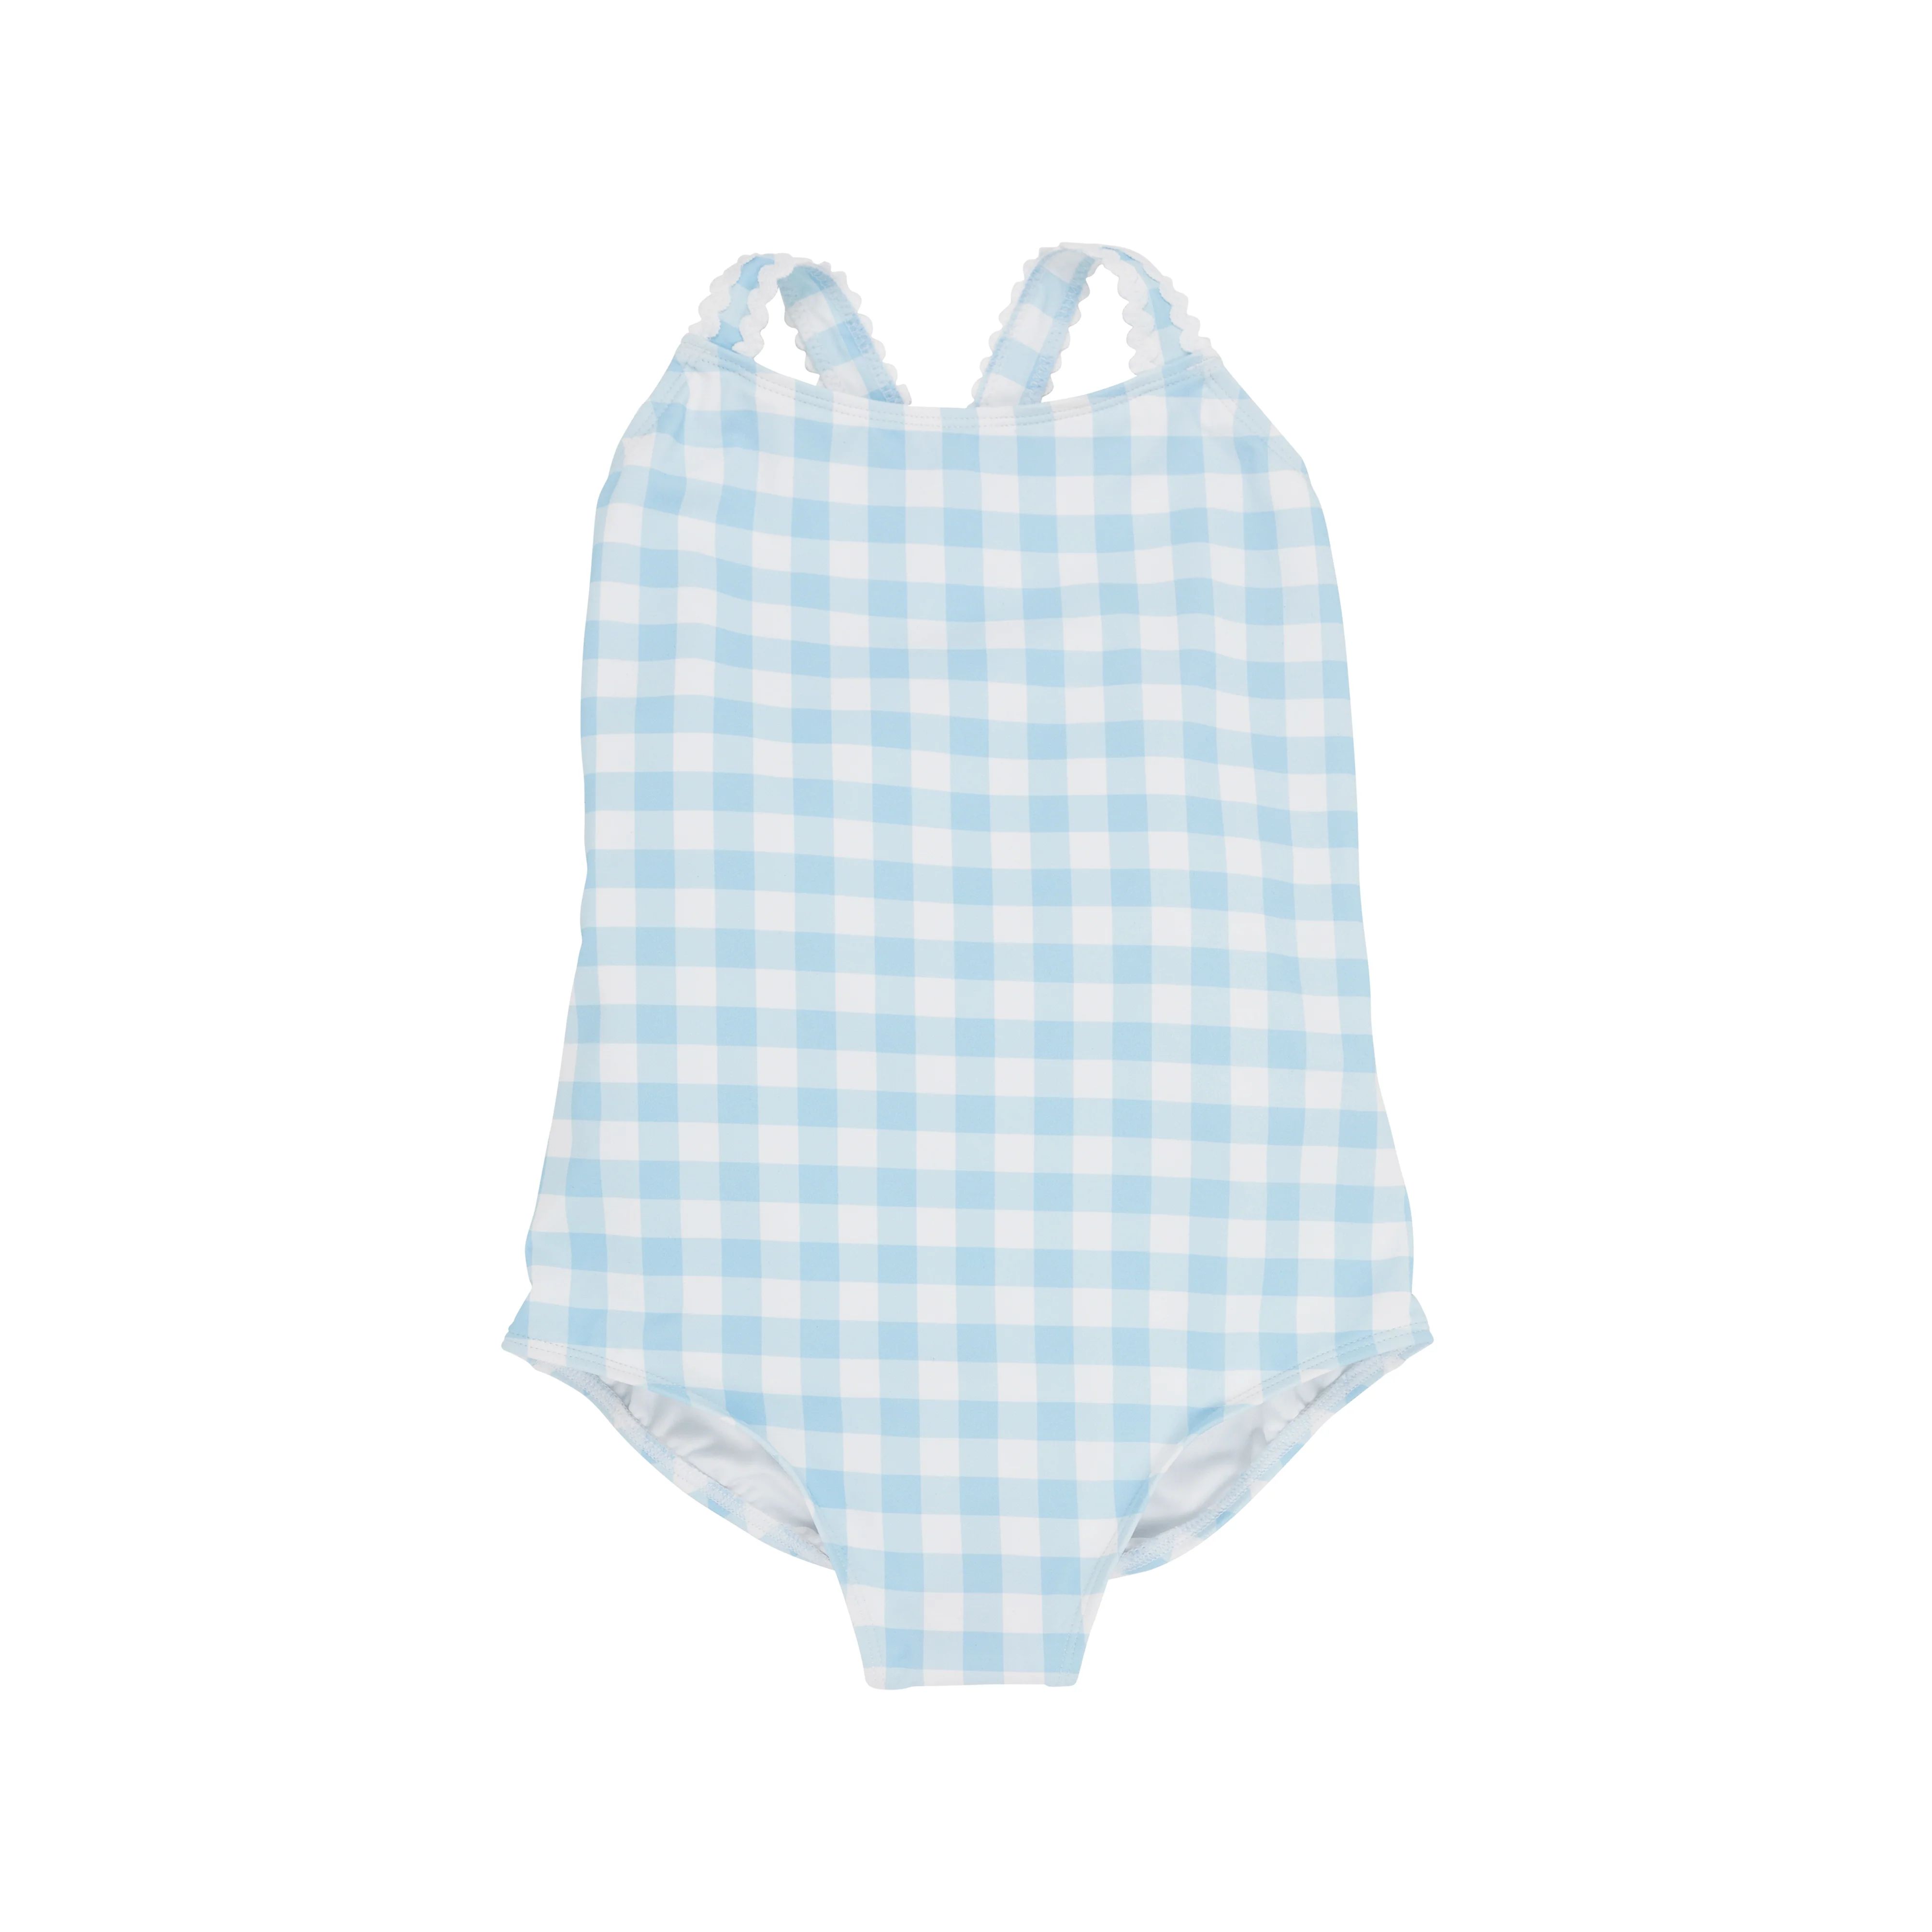 Taylor Bay Bathing Suit - Buckhead Blue Gingham with Worth Avenue White | The Beaufort Bonnet Company